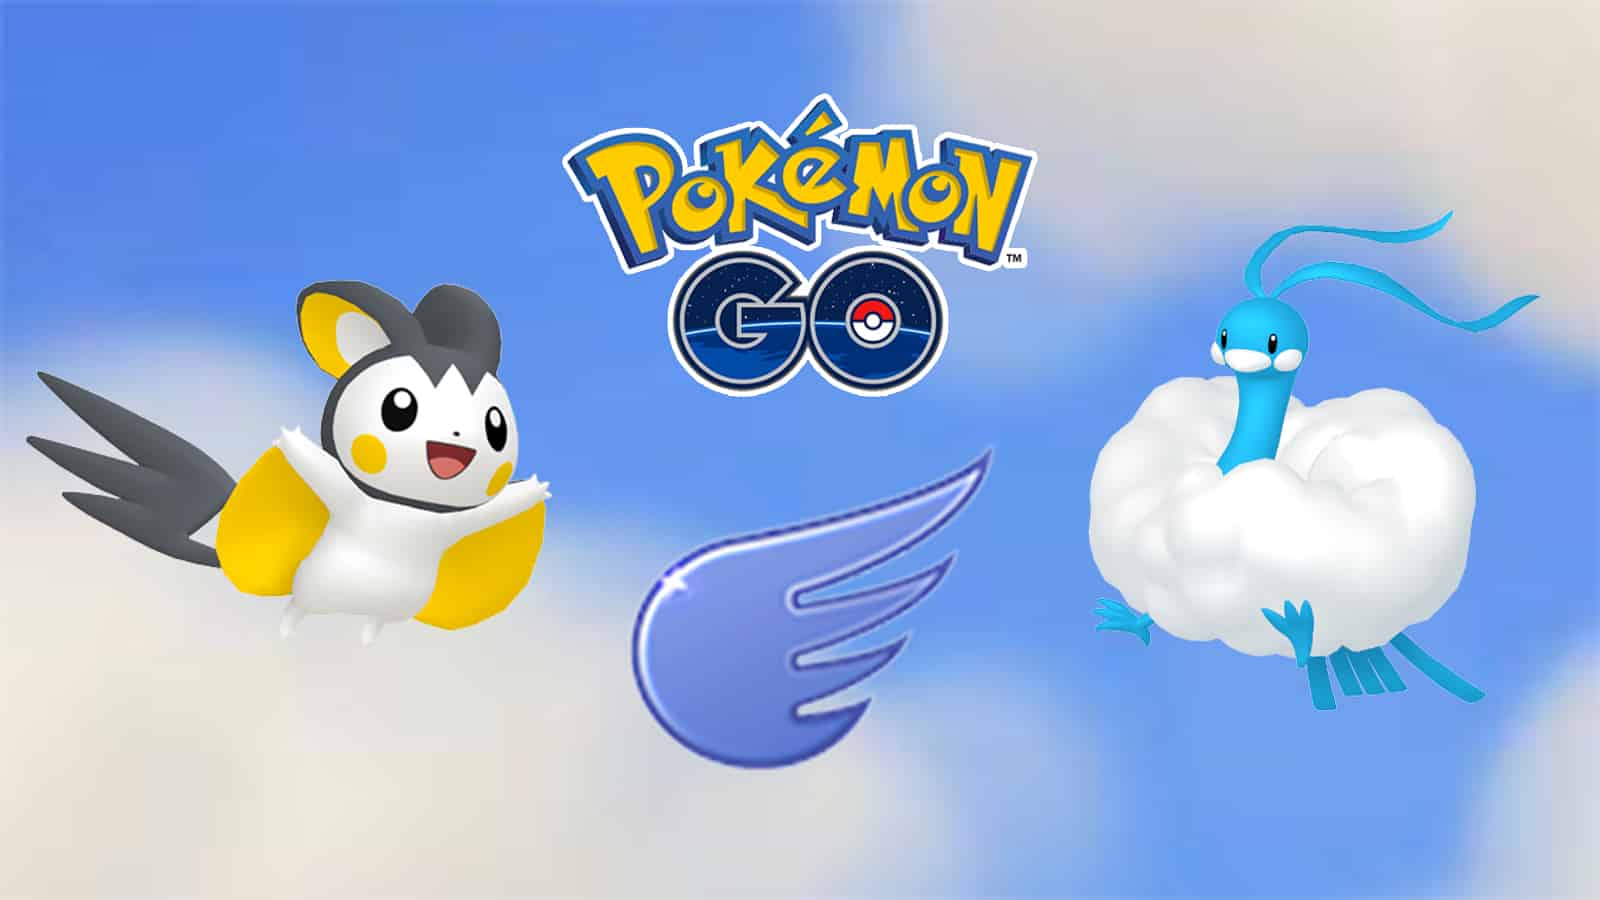 Emolga and Altaria appearing in the Flying Cup best team